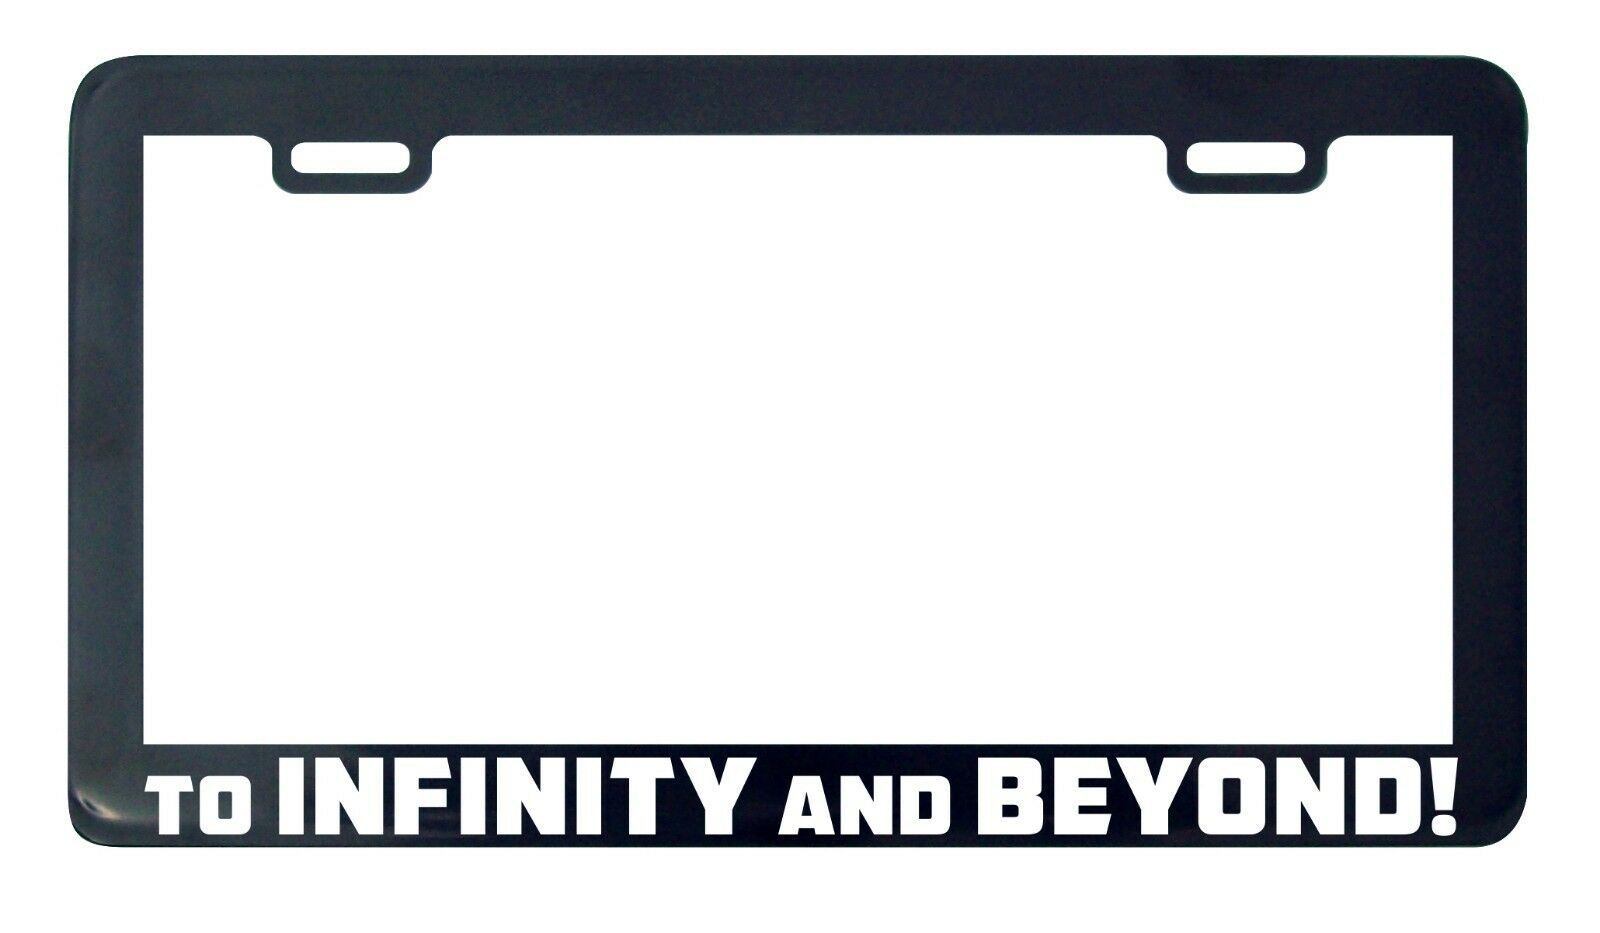 Primary image for To infinity and beyond toy story license plate frame holder tag